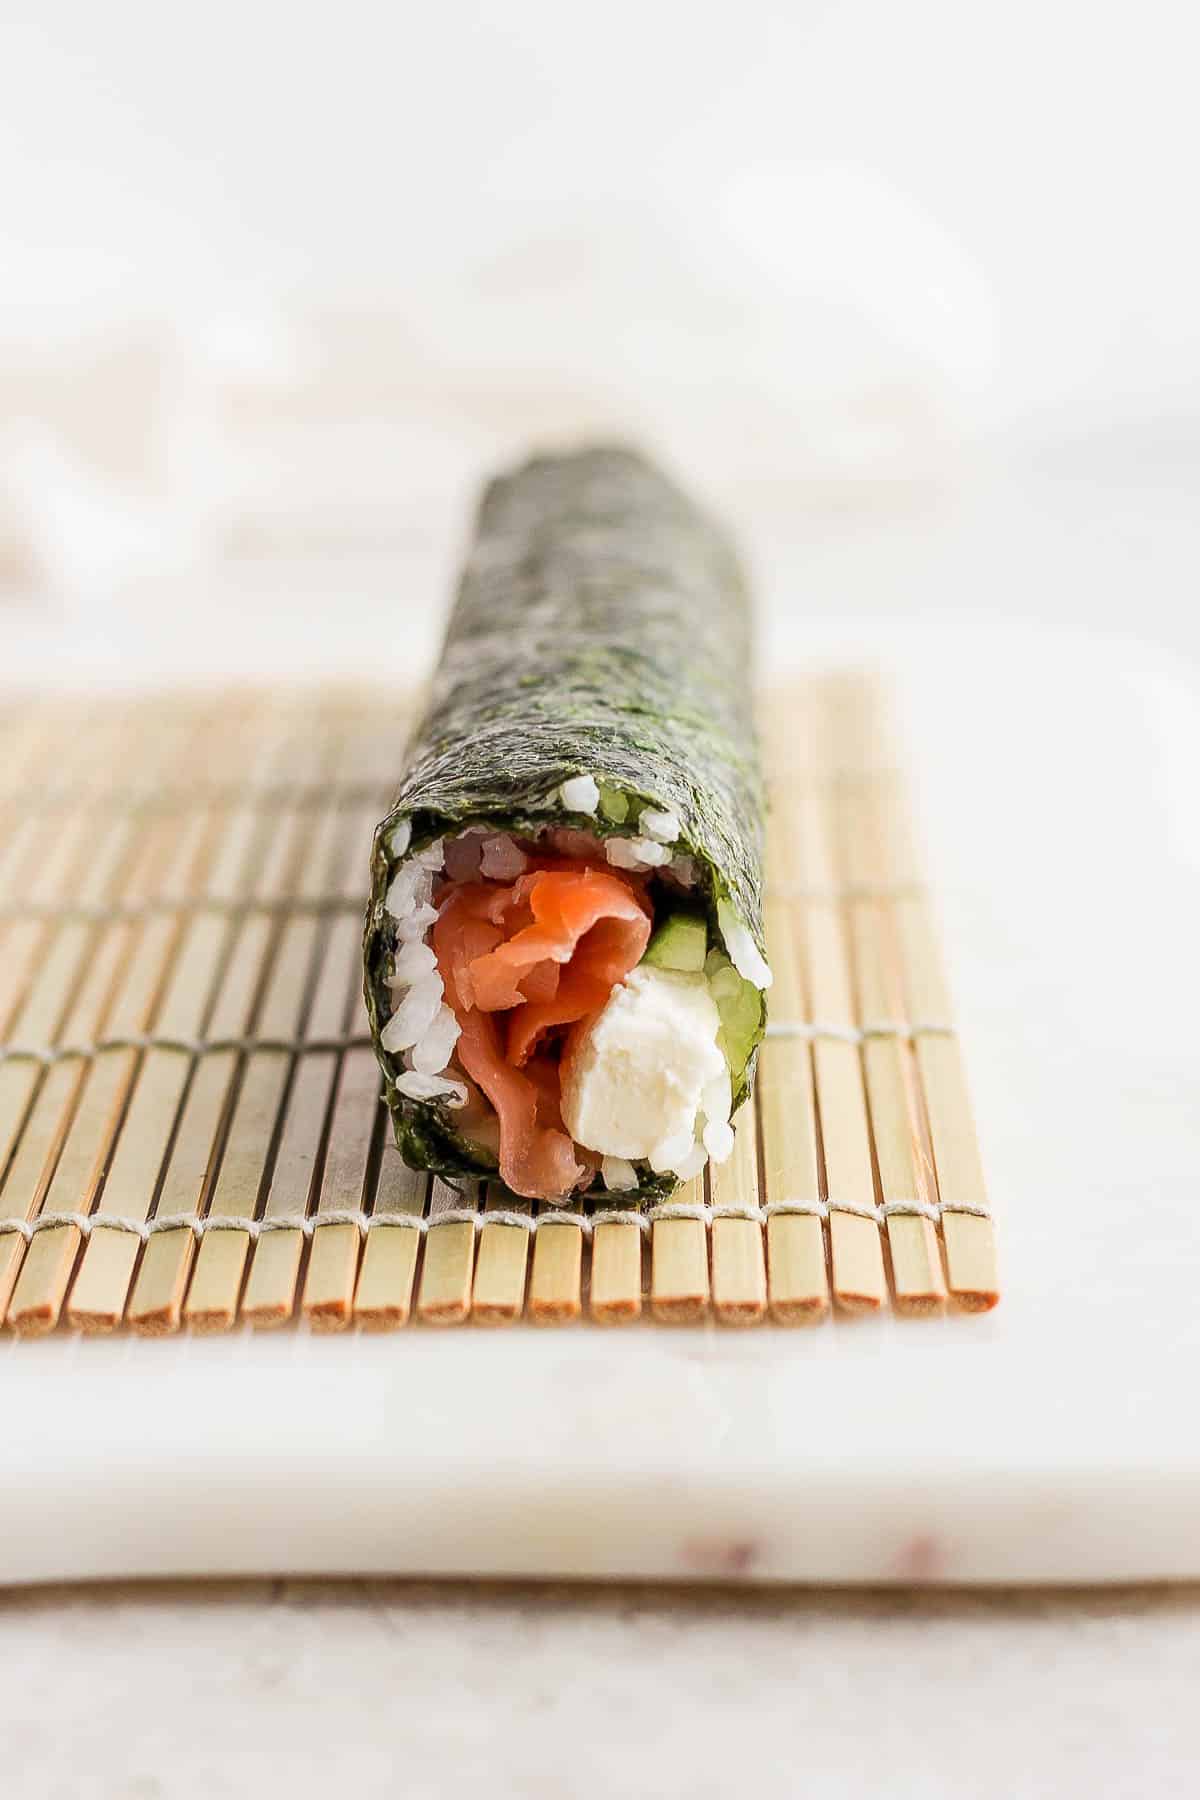 A secure philadelphia roll on top of a bamboo sheet.